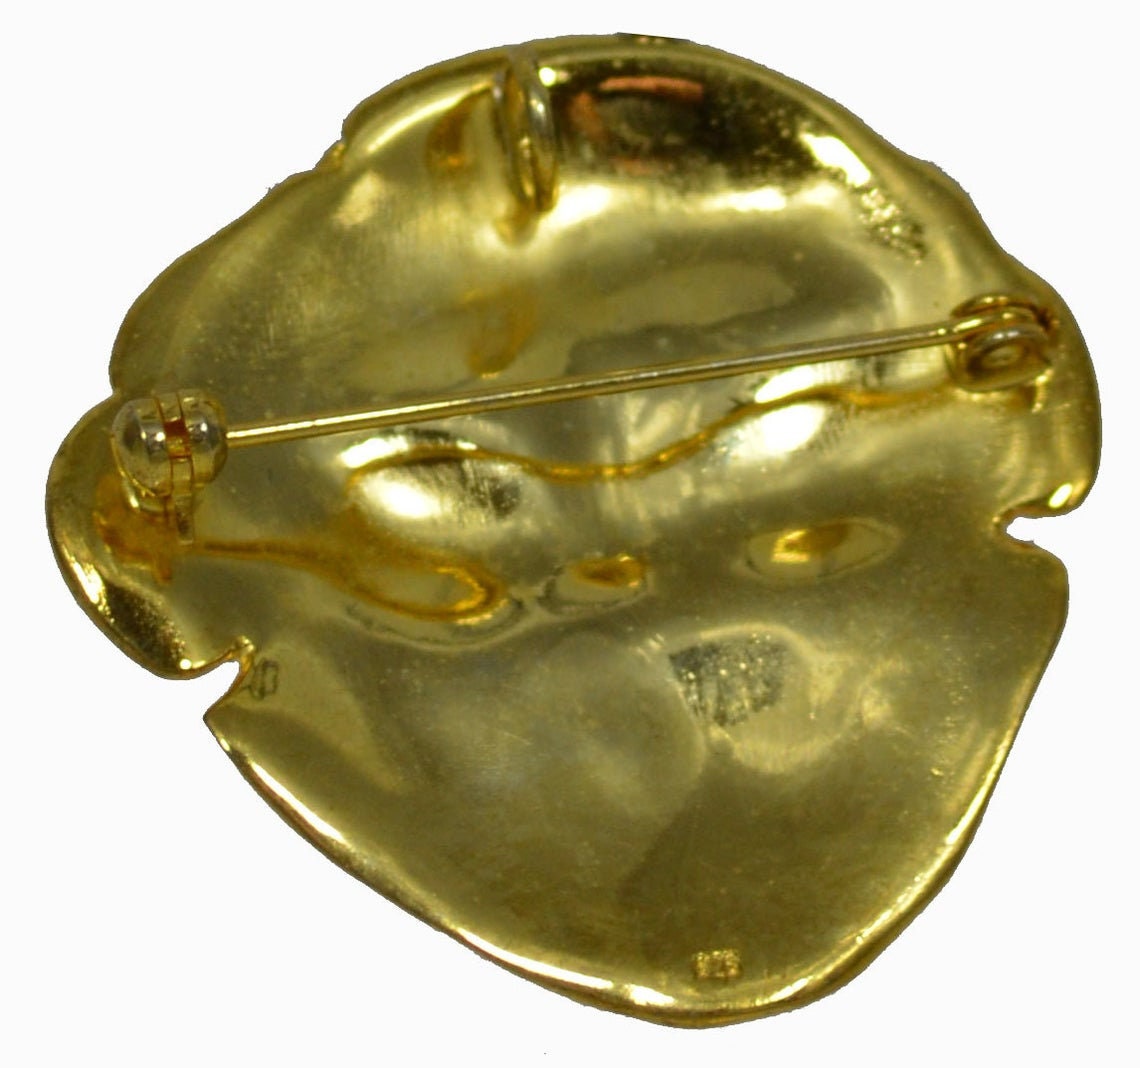 Mask of Agamemnon - King of Mycenae - Commander of Greeks in Trojan War - Gold Plated Pendant - Brooch Pin - 925 Sterling Silver